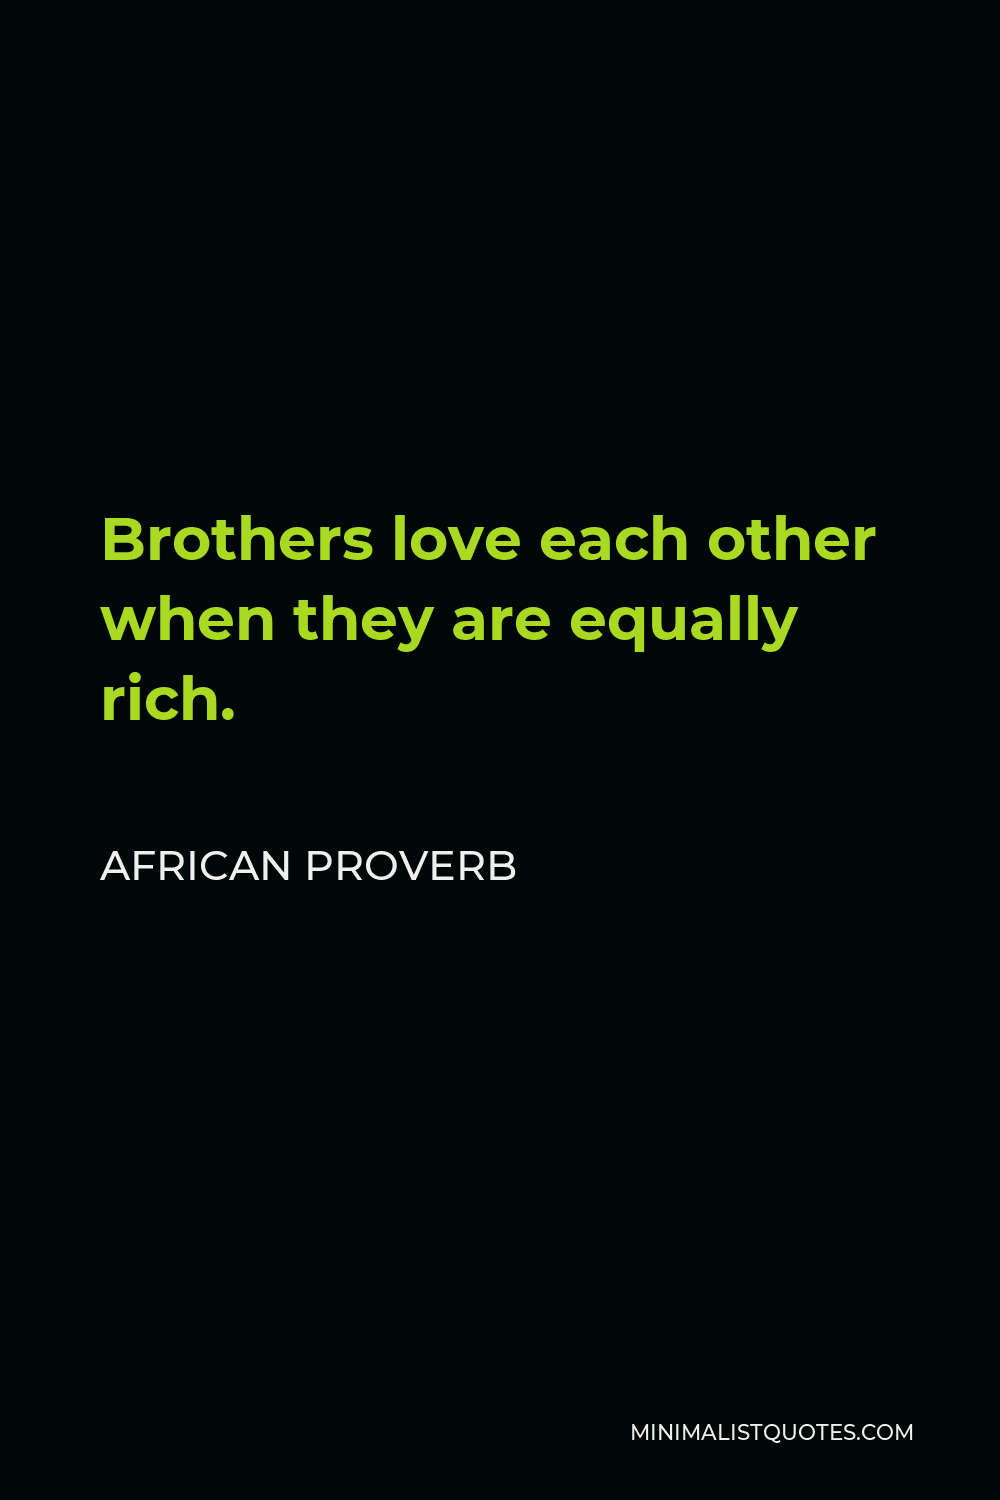 African Proverb Quote - Brothers love each other when they are equally rich.